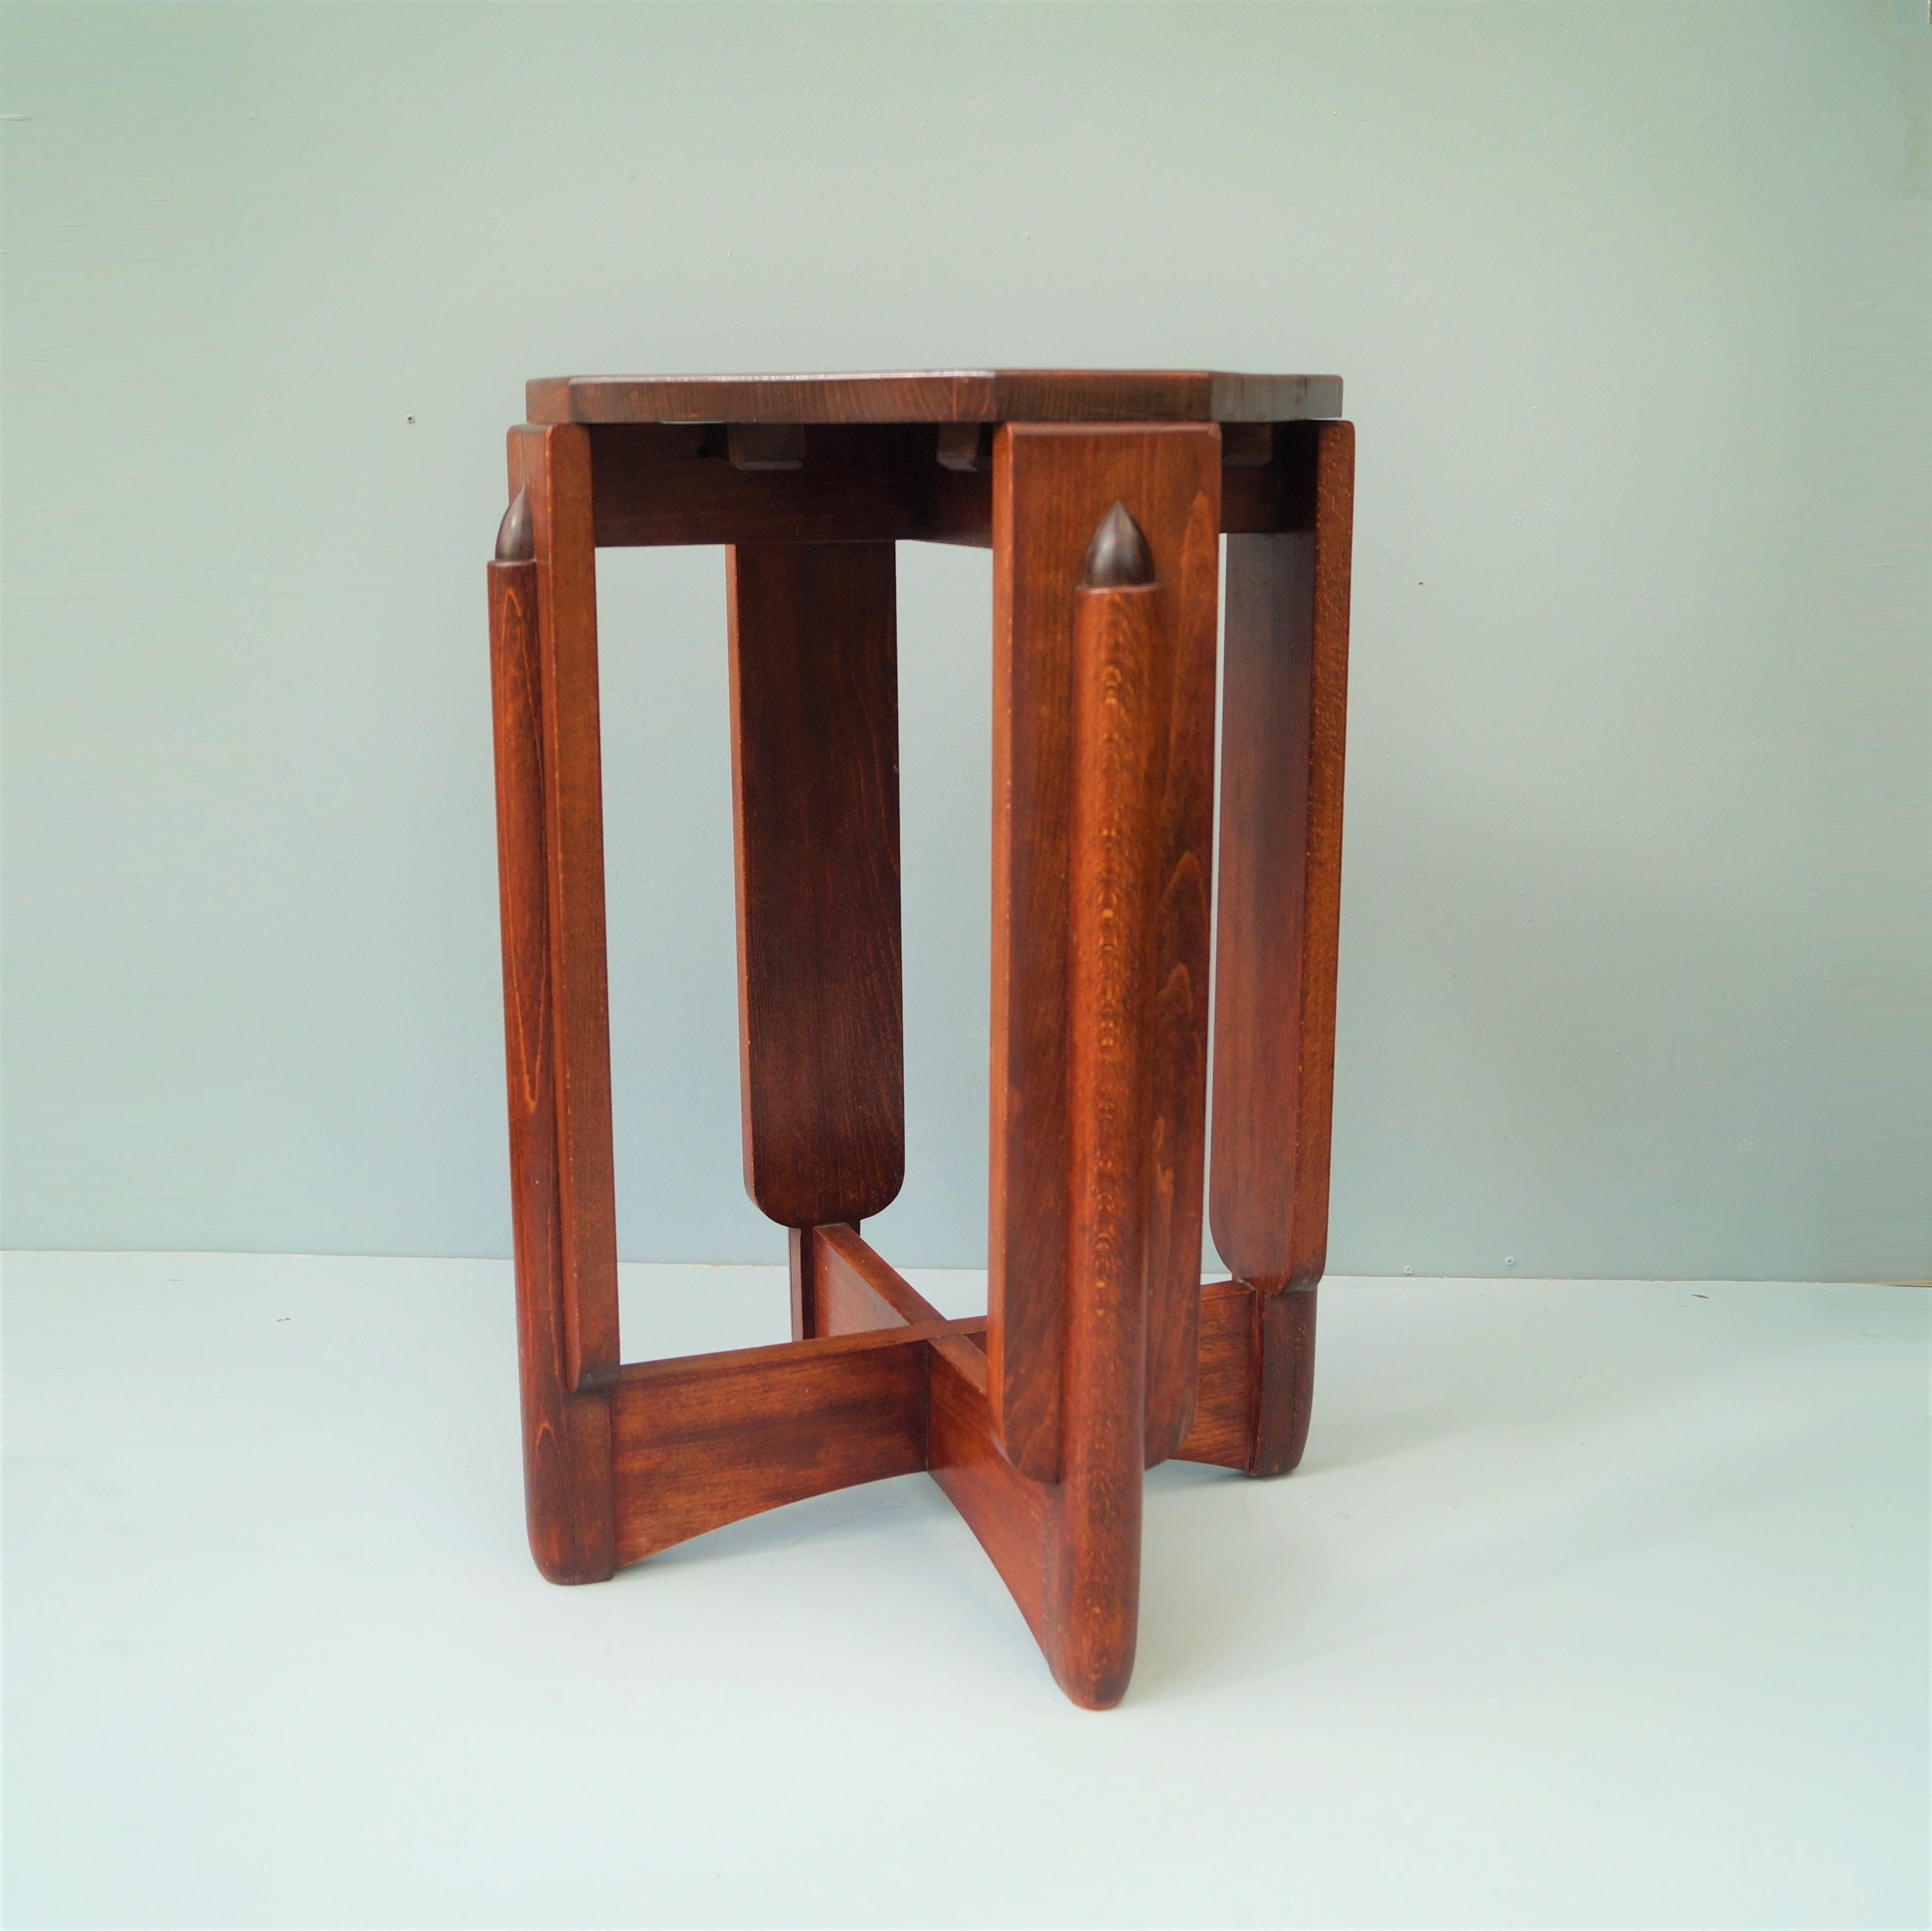 Sculptural occasional side table in solid beech wood and macassar ebony details,  1920s, Dutch Amsterdam School. The table has an octagonal tabletop and characteristic macassar ornaments around the top. The lower part has nicely shaped rounded leg